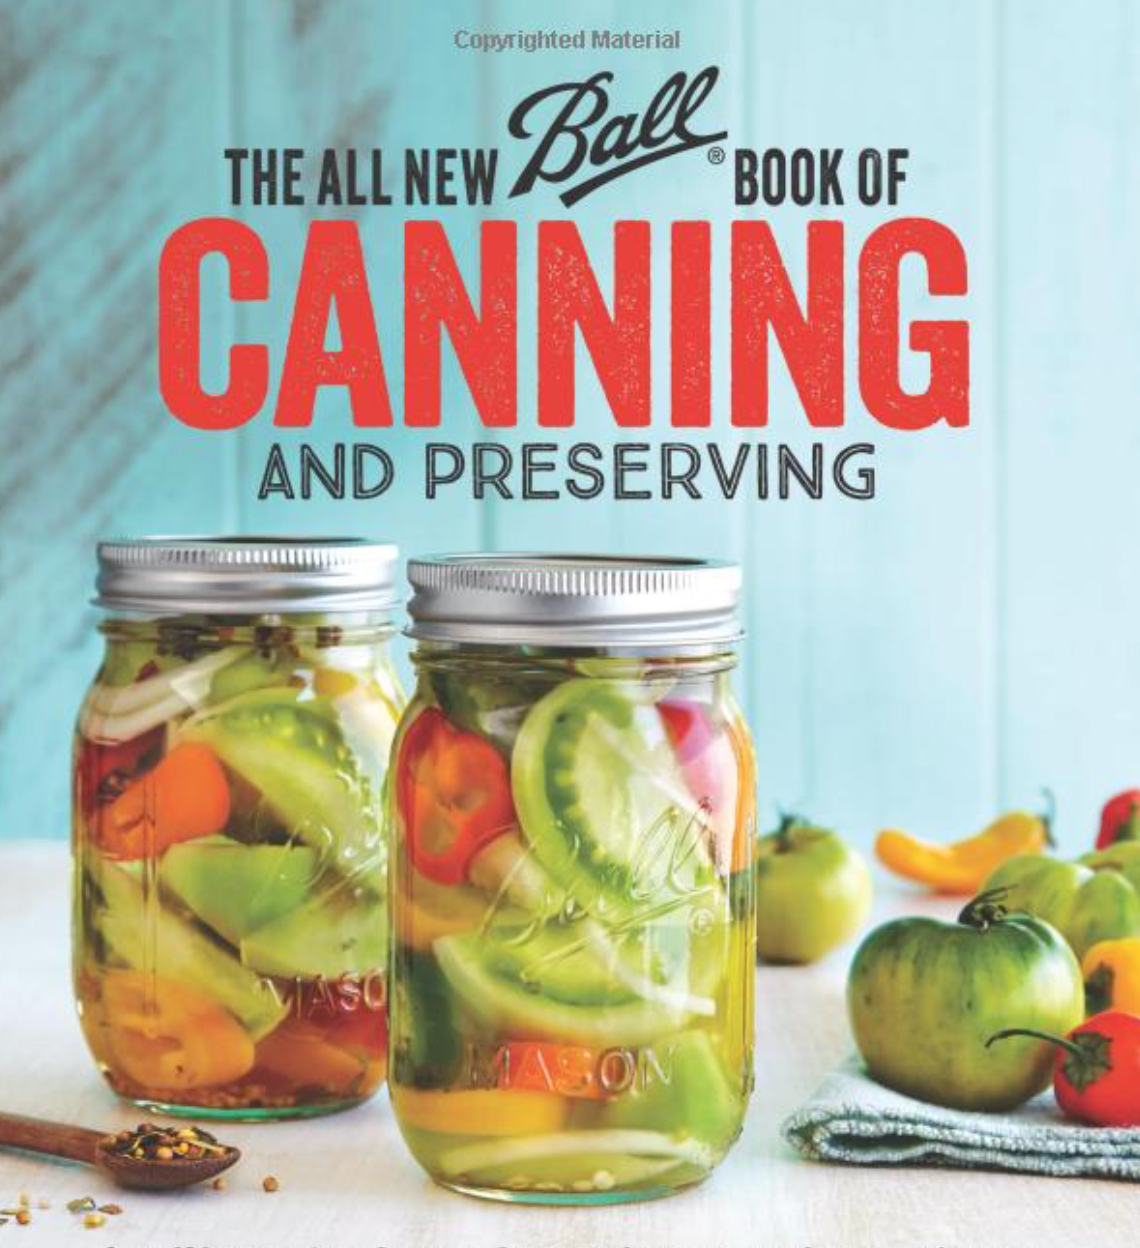 The All New Ball Book Of Canning And Preserving, $17.08 paperback https://amzn.to/3r7uruj